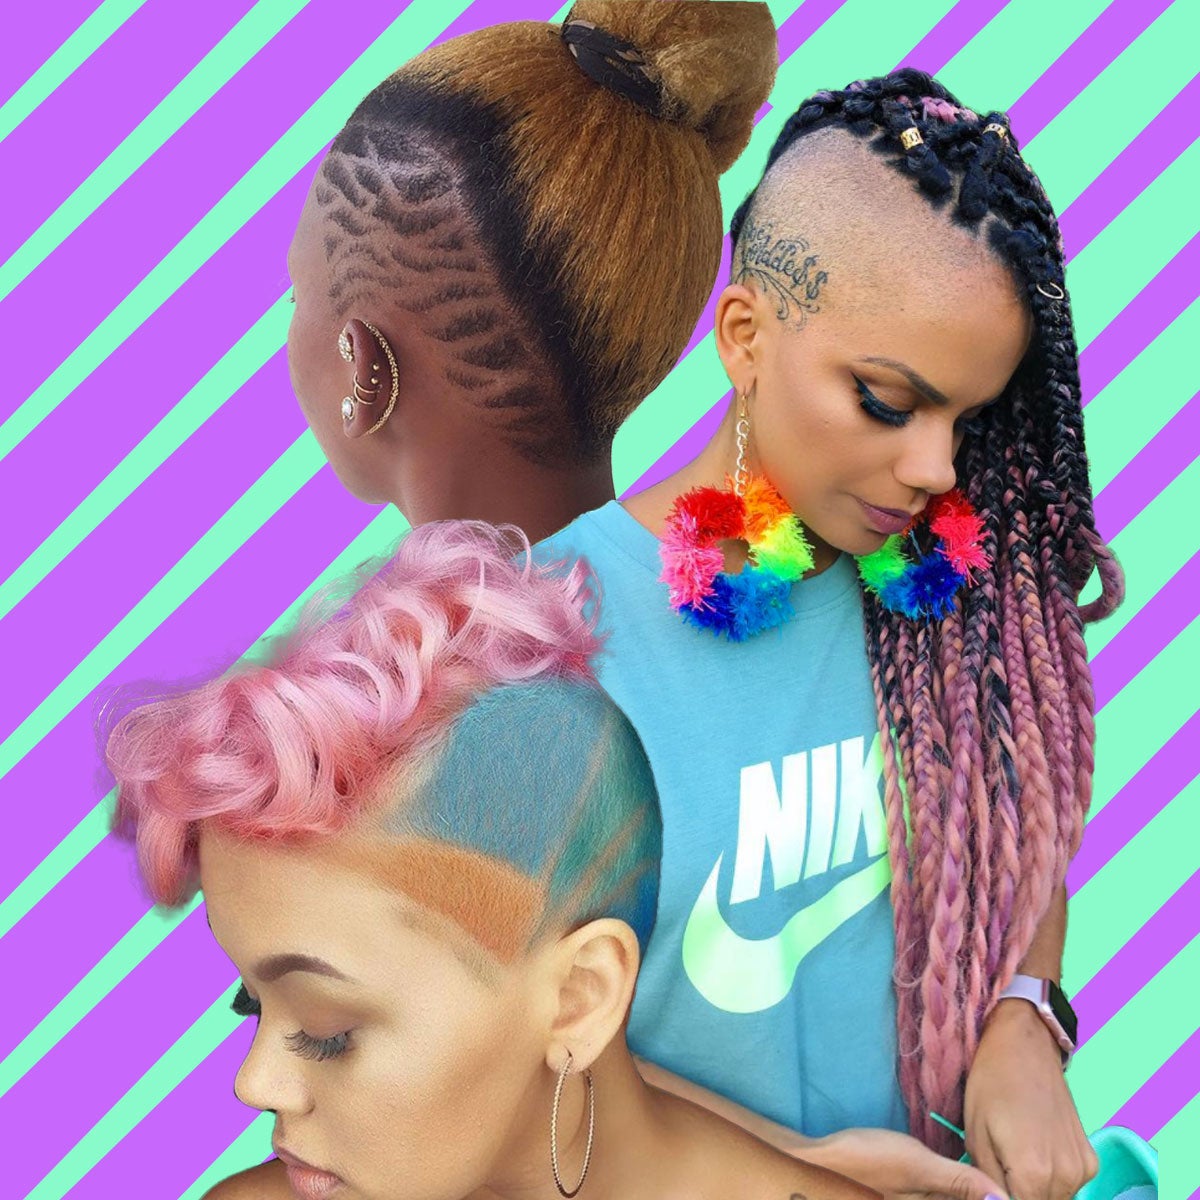 19 Unique Undercut and Long Hair Combos That Will Give You Life
